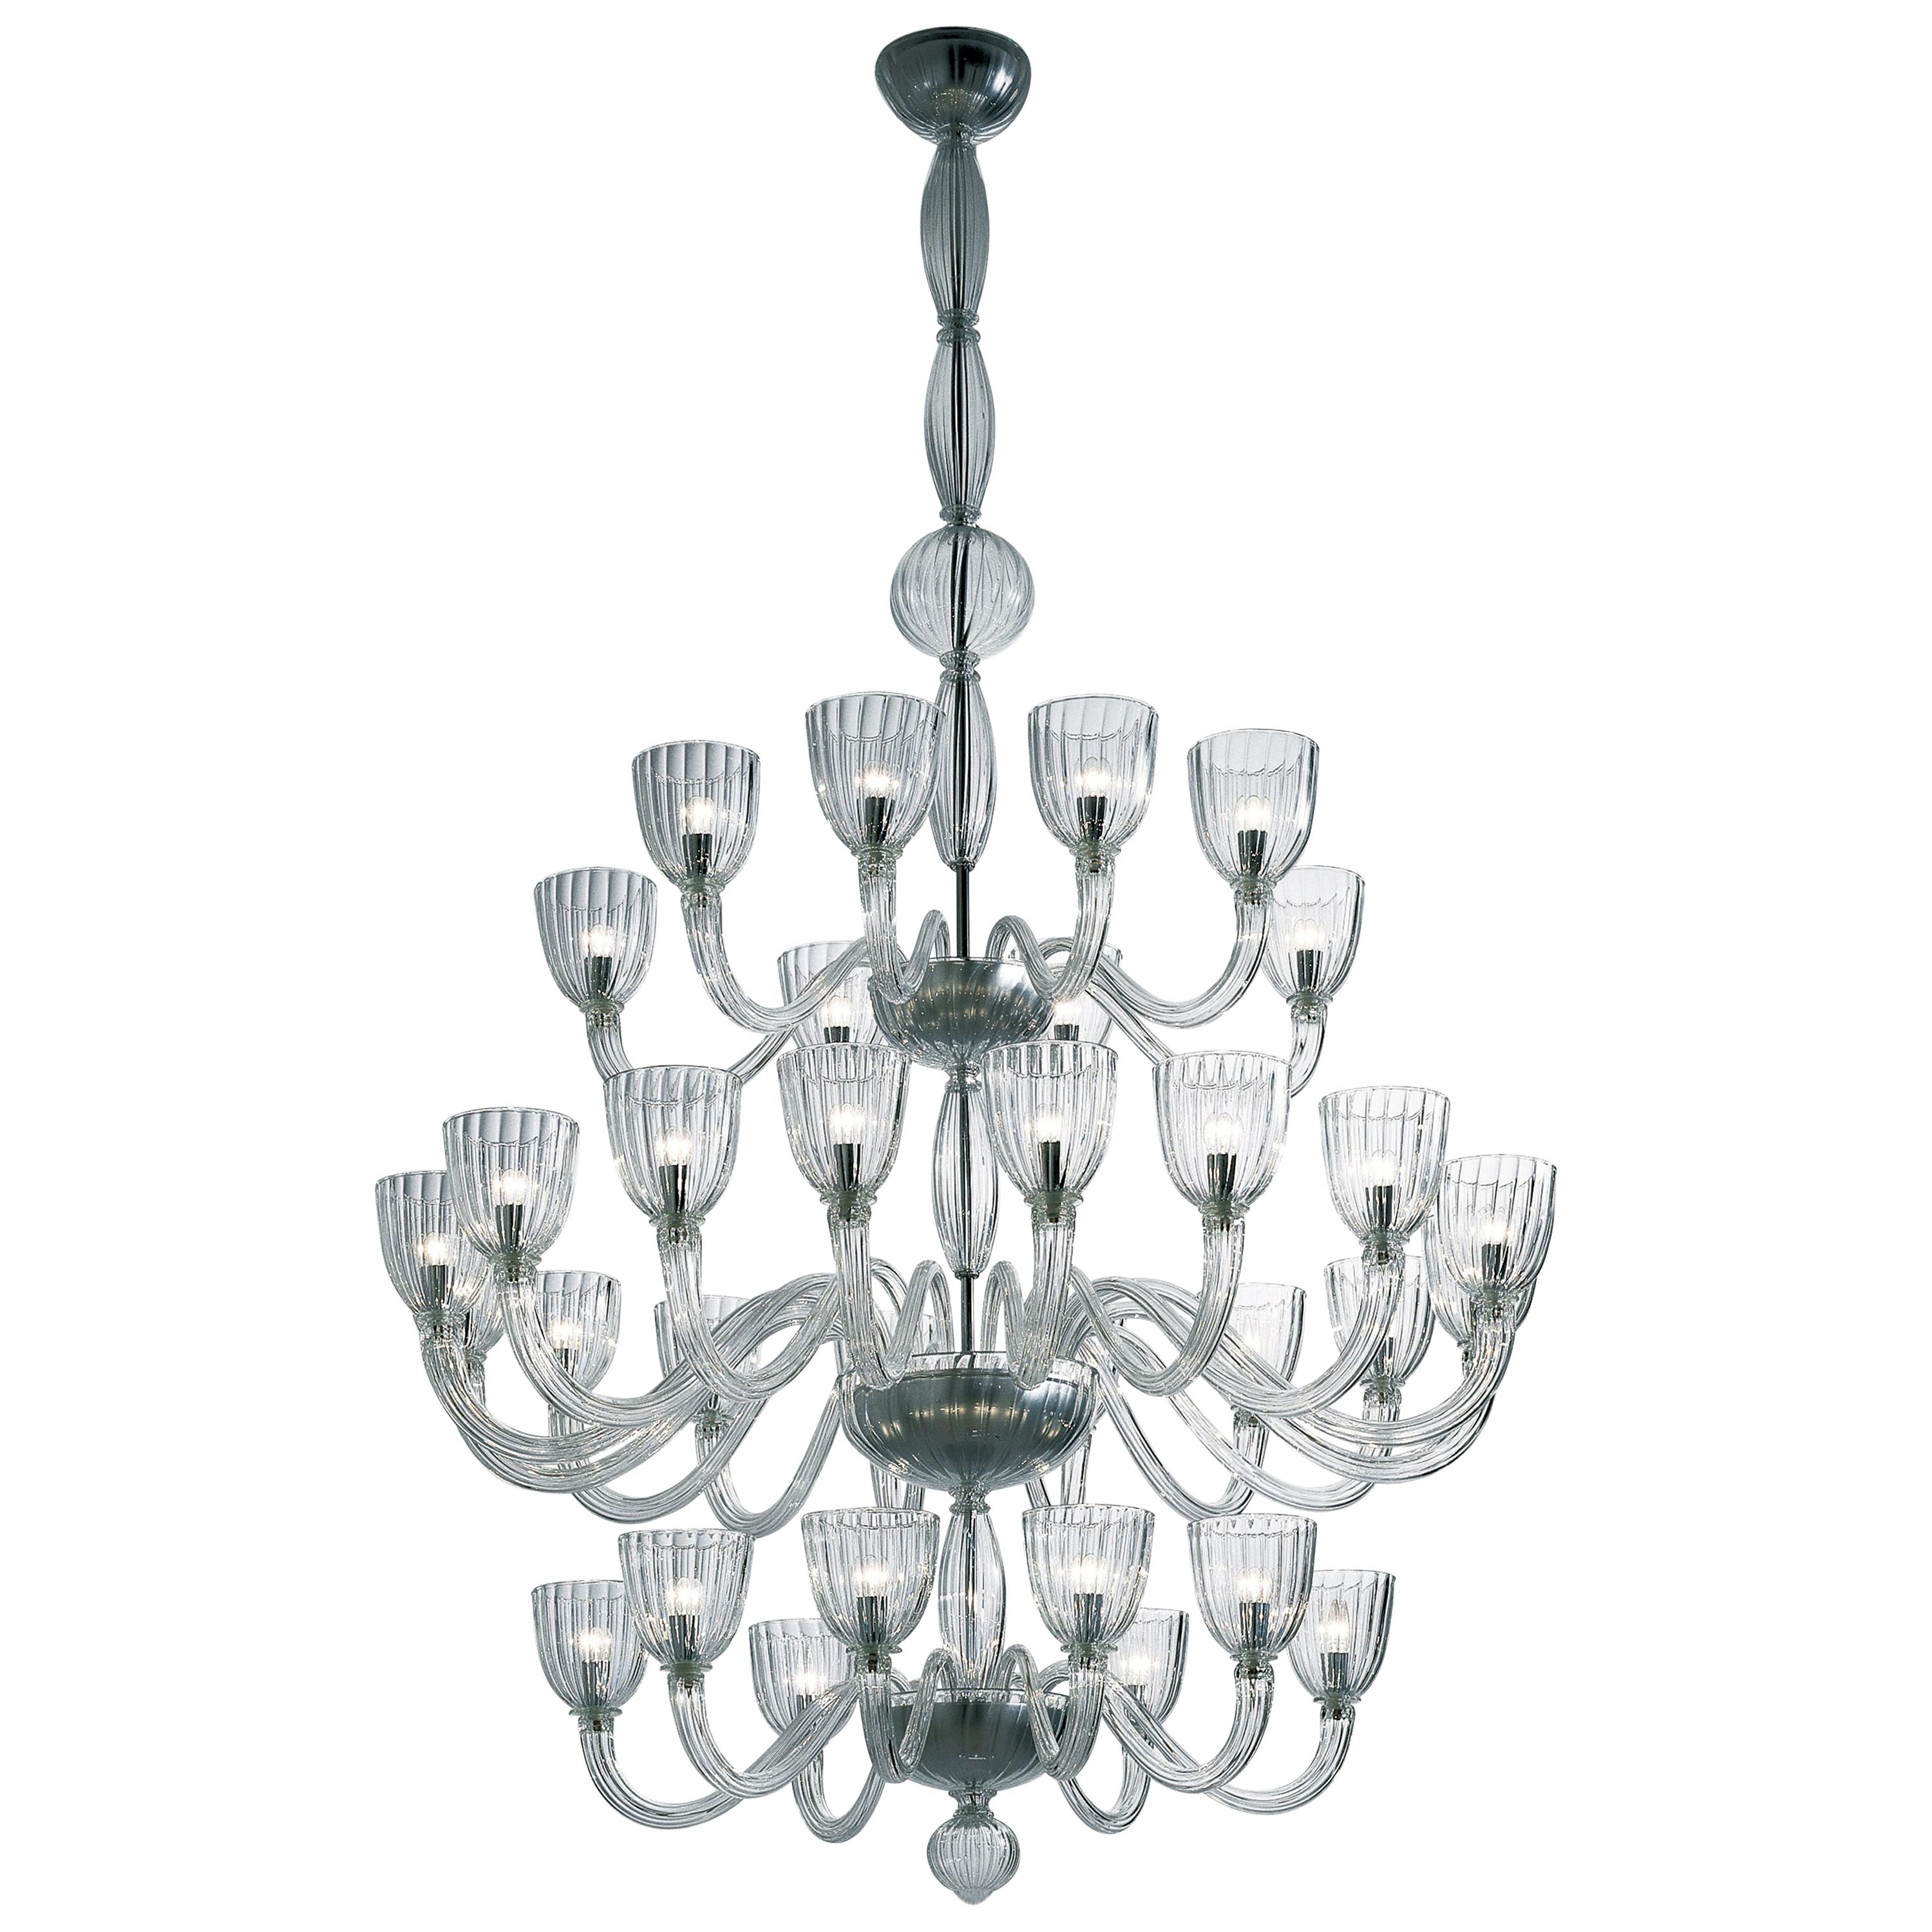 Martinengo 32-Light Chandelier in Crystal by Venini